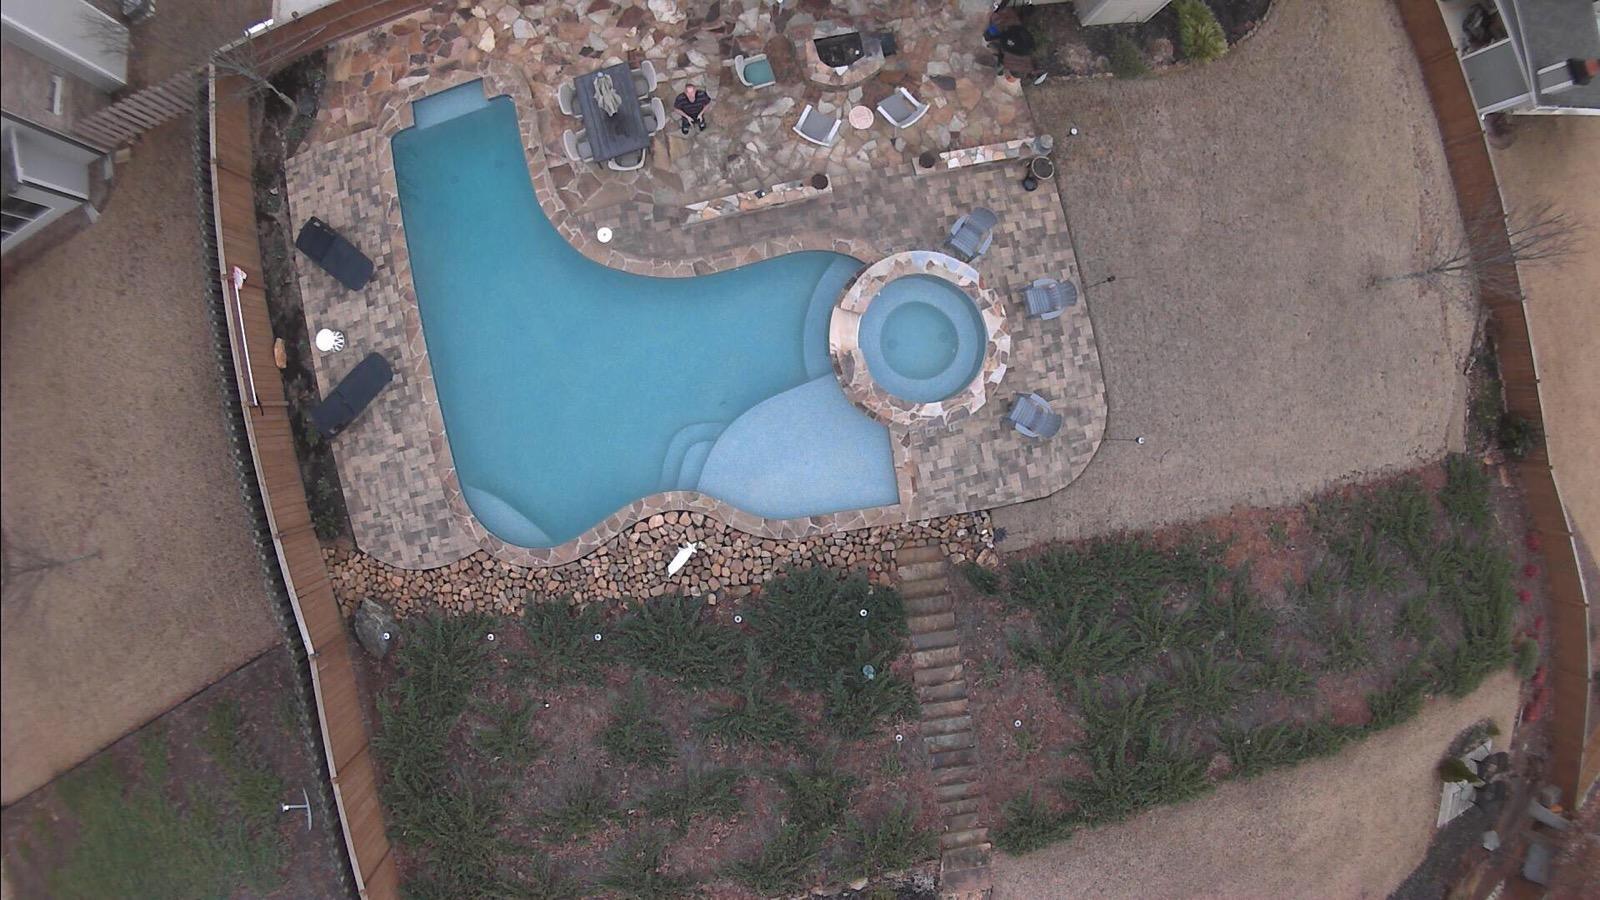 nice pool fit tightly in a limited area.